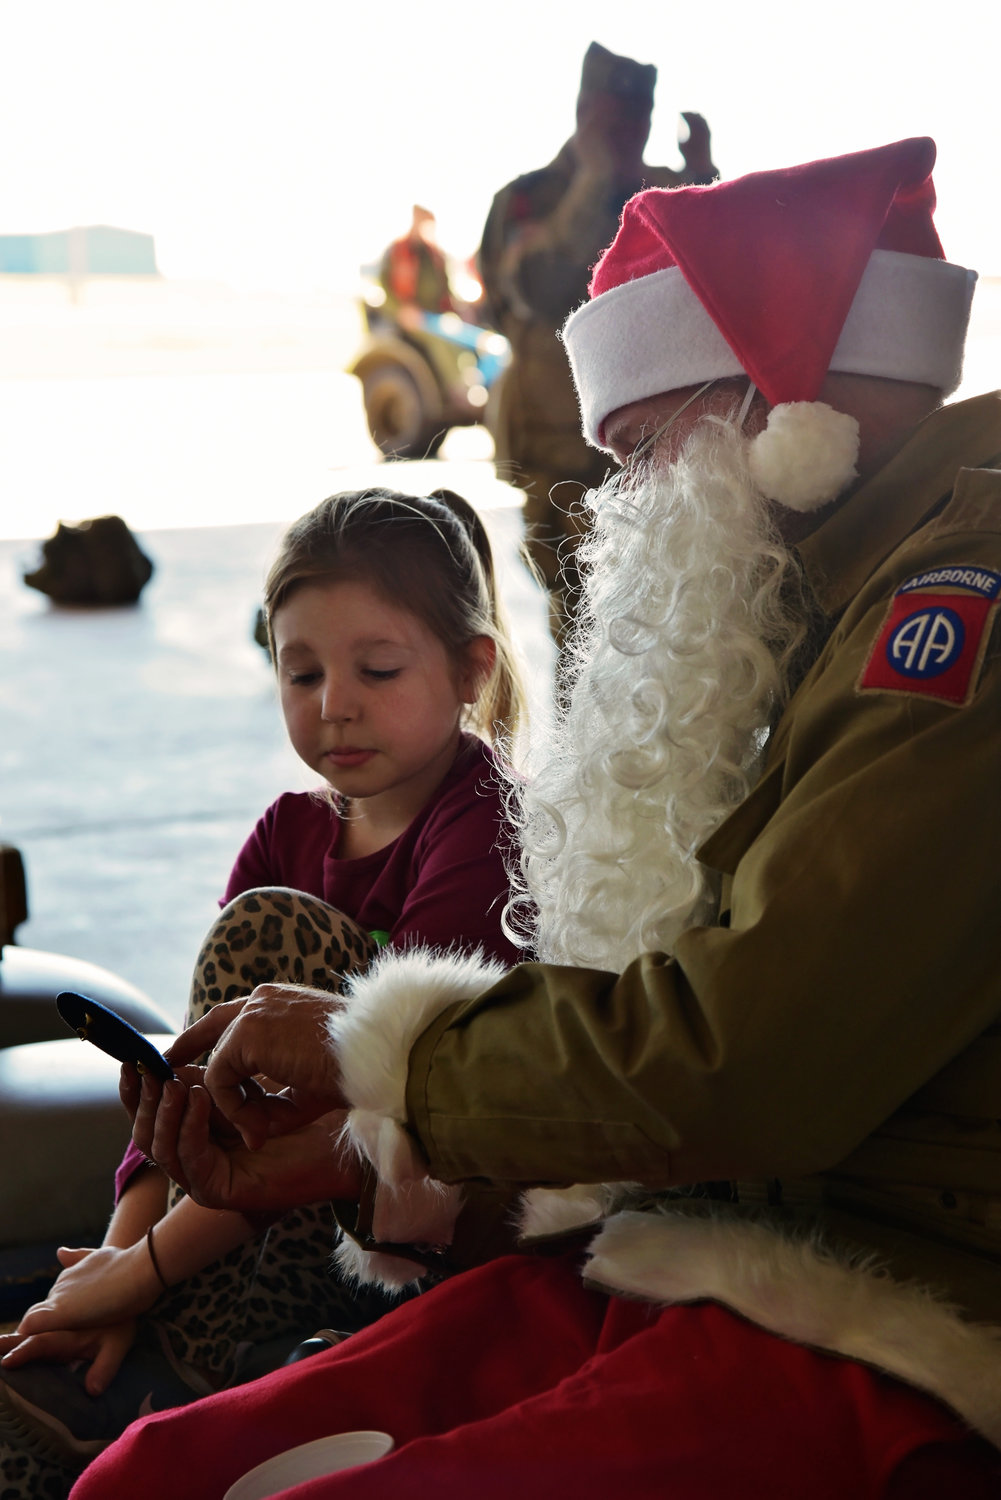 Eight-year-old Georgia Davis came from Texas to watch her daddy jump from an airplane. Here she is pictured with Santa, learning about WWII.